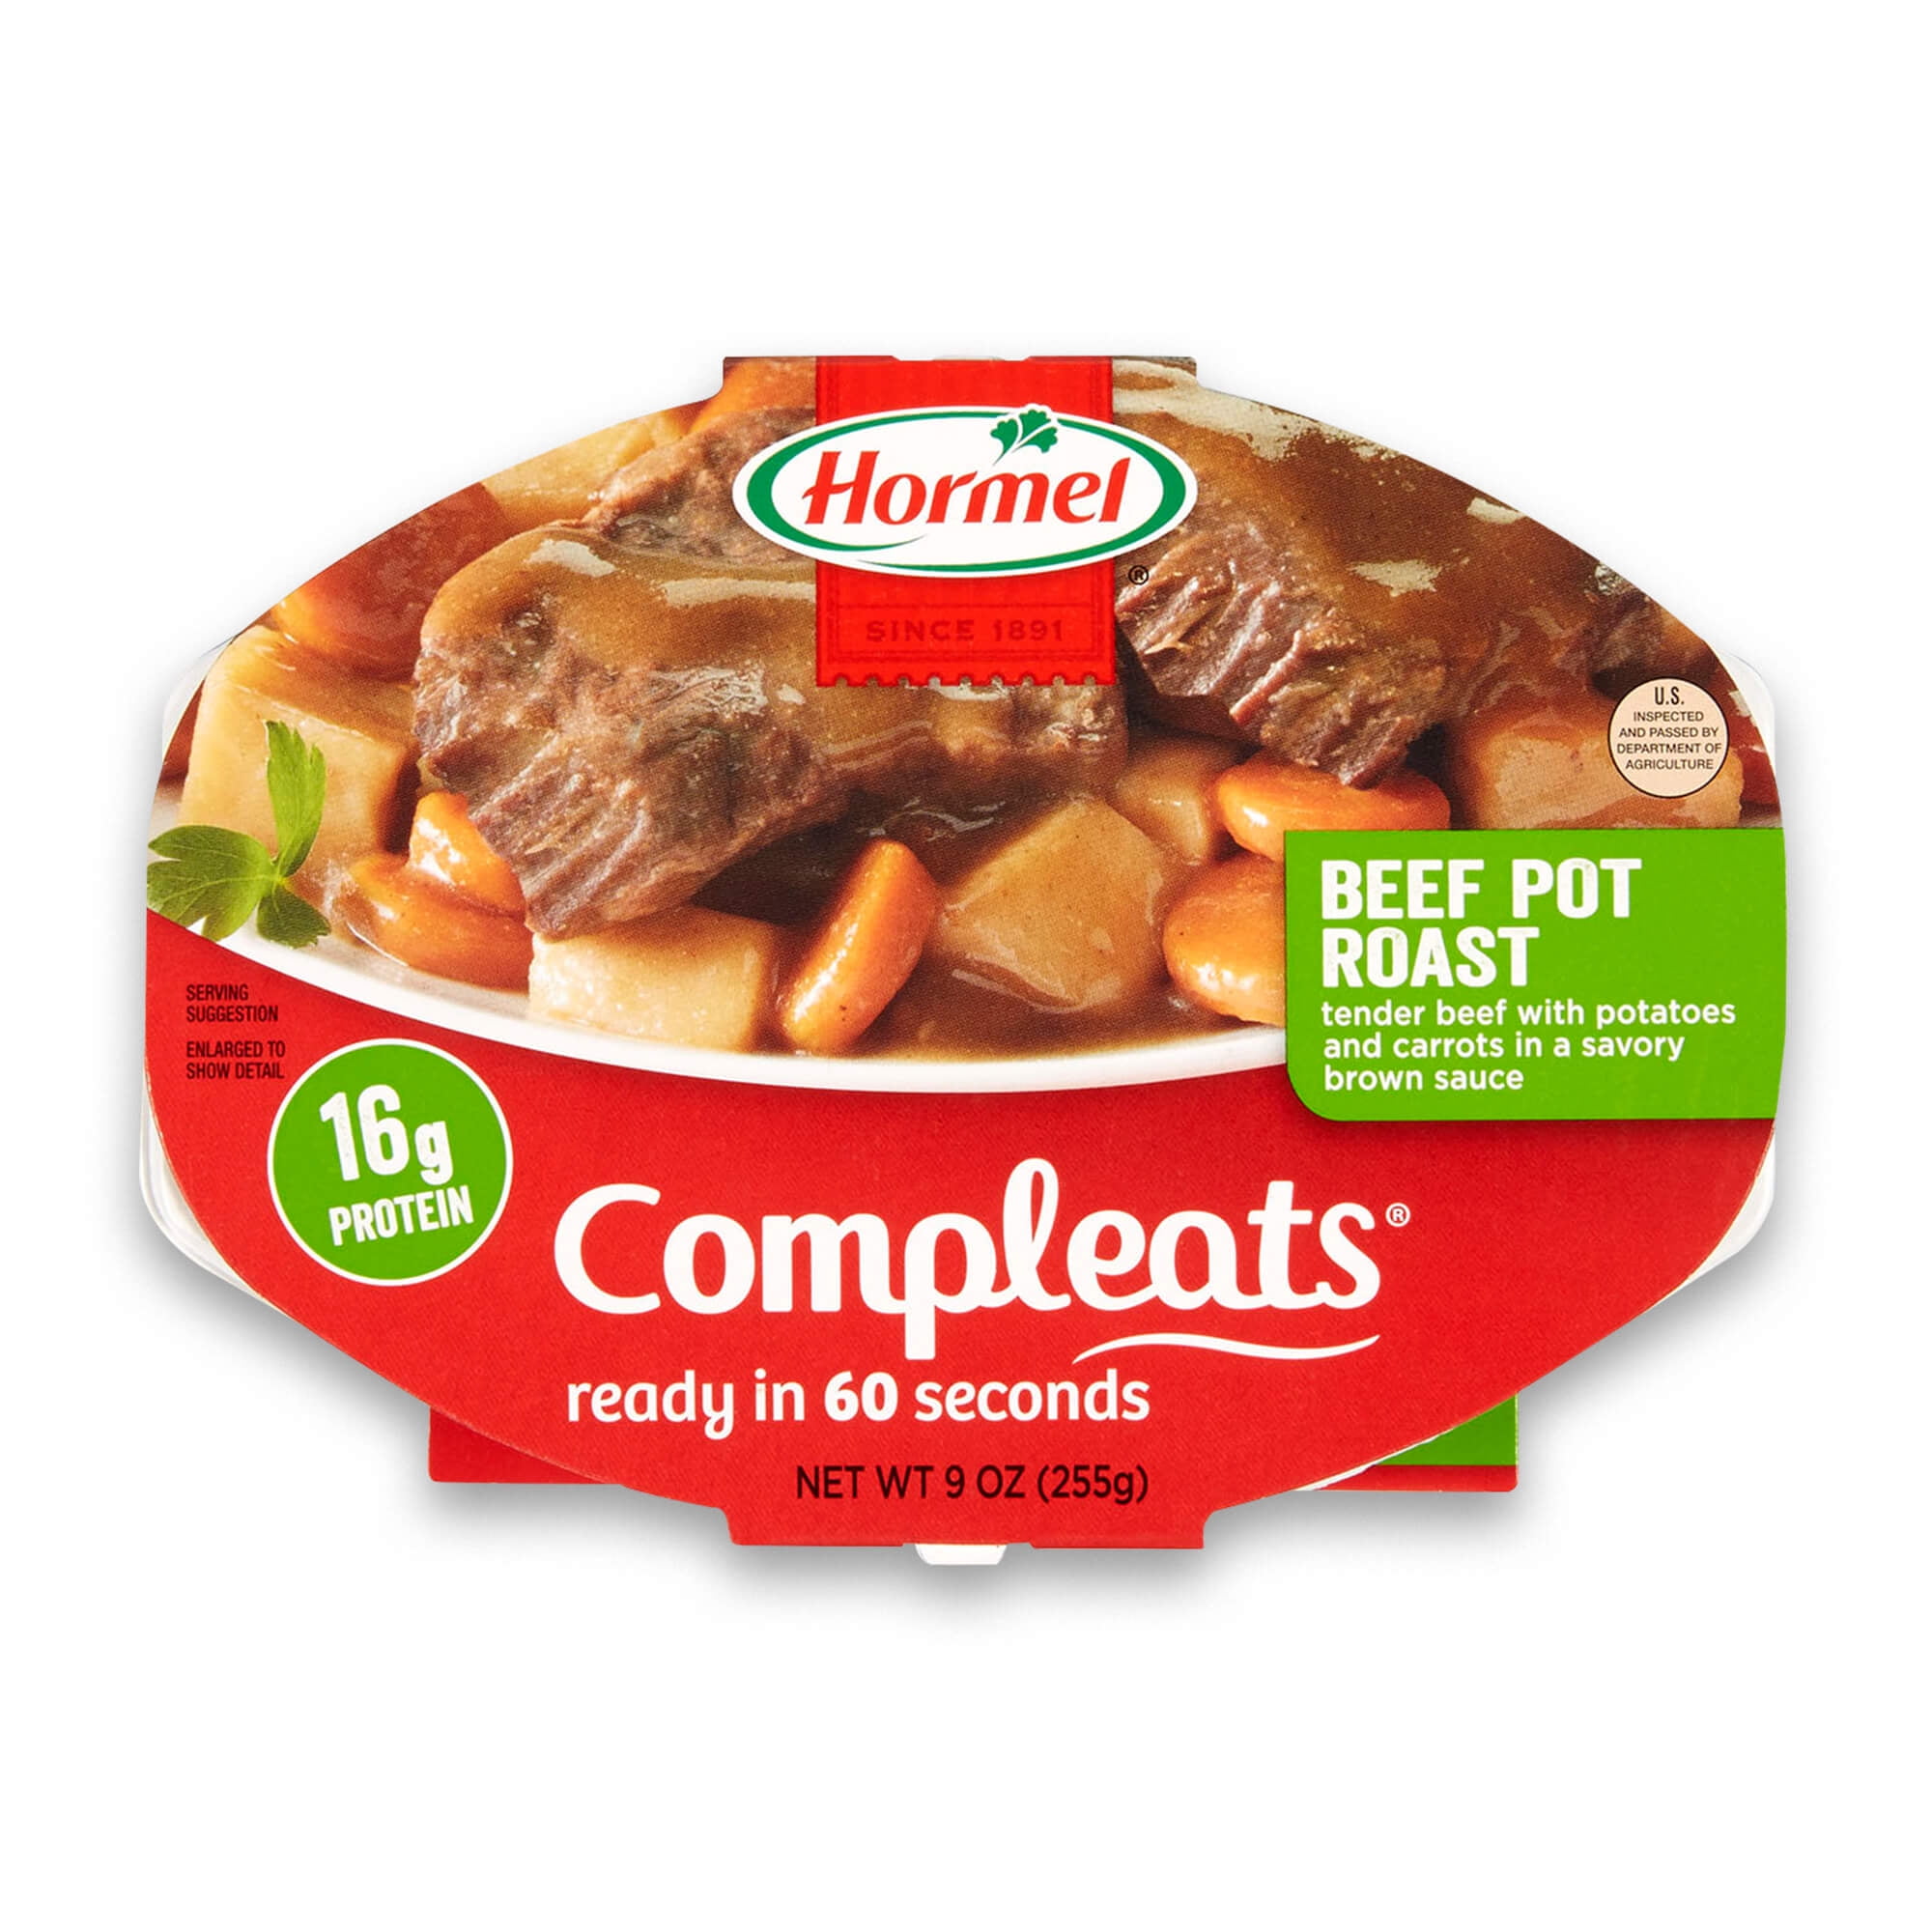 HORMEL COMPLEATS Beef Pot Roast With Potatoes & Carrots Microwave Tray, 9 oz